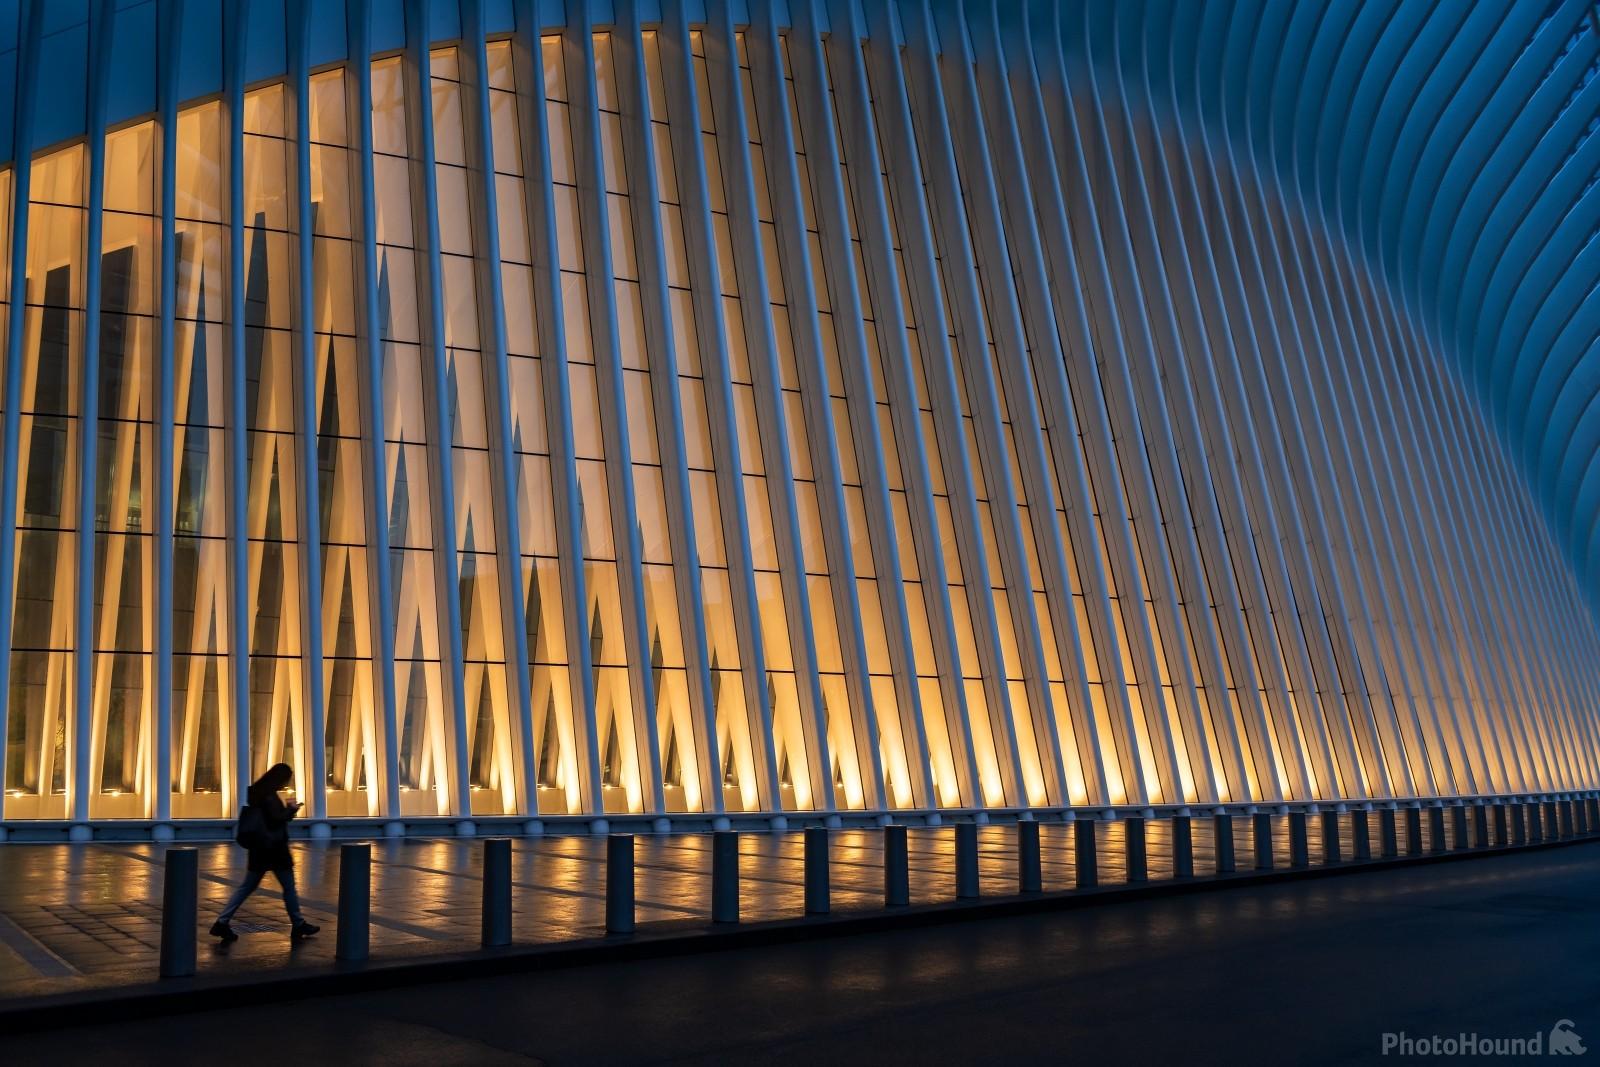 Image of The Oculus  (Exterior) by VOJTa Herout